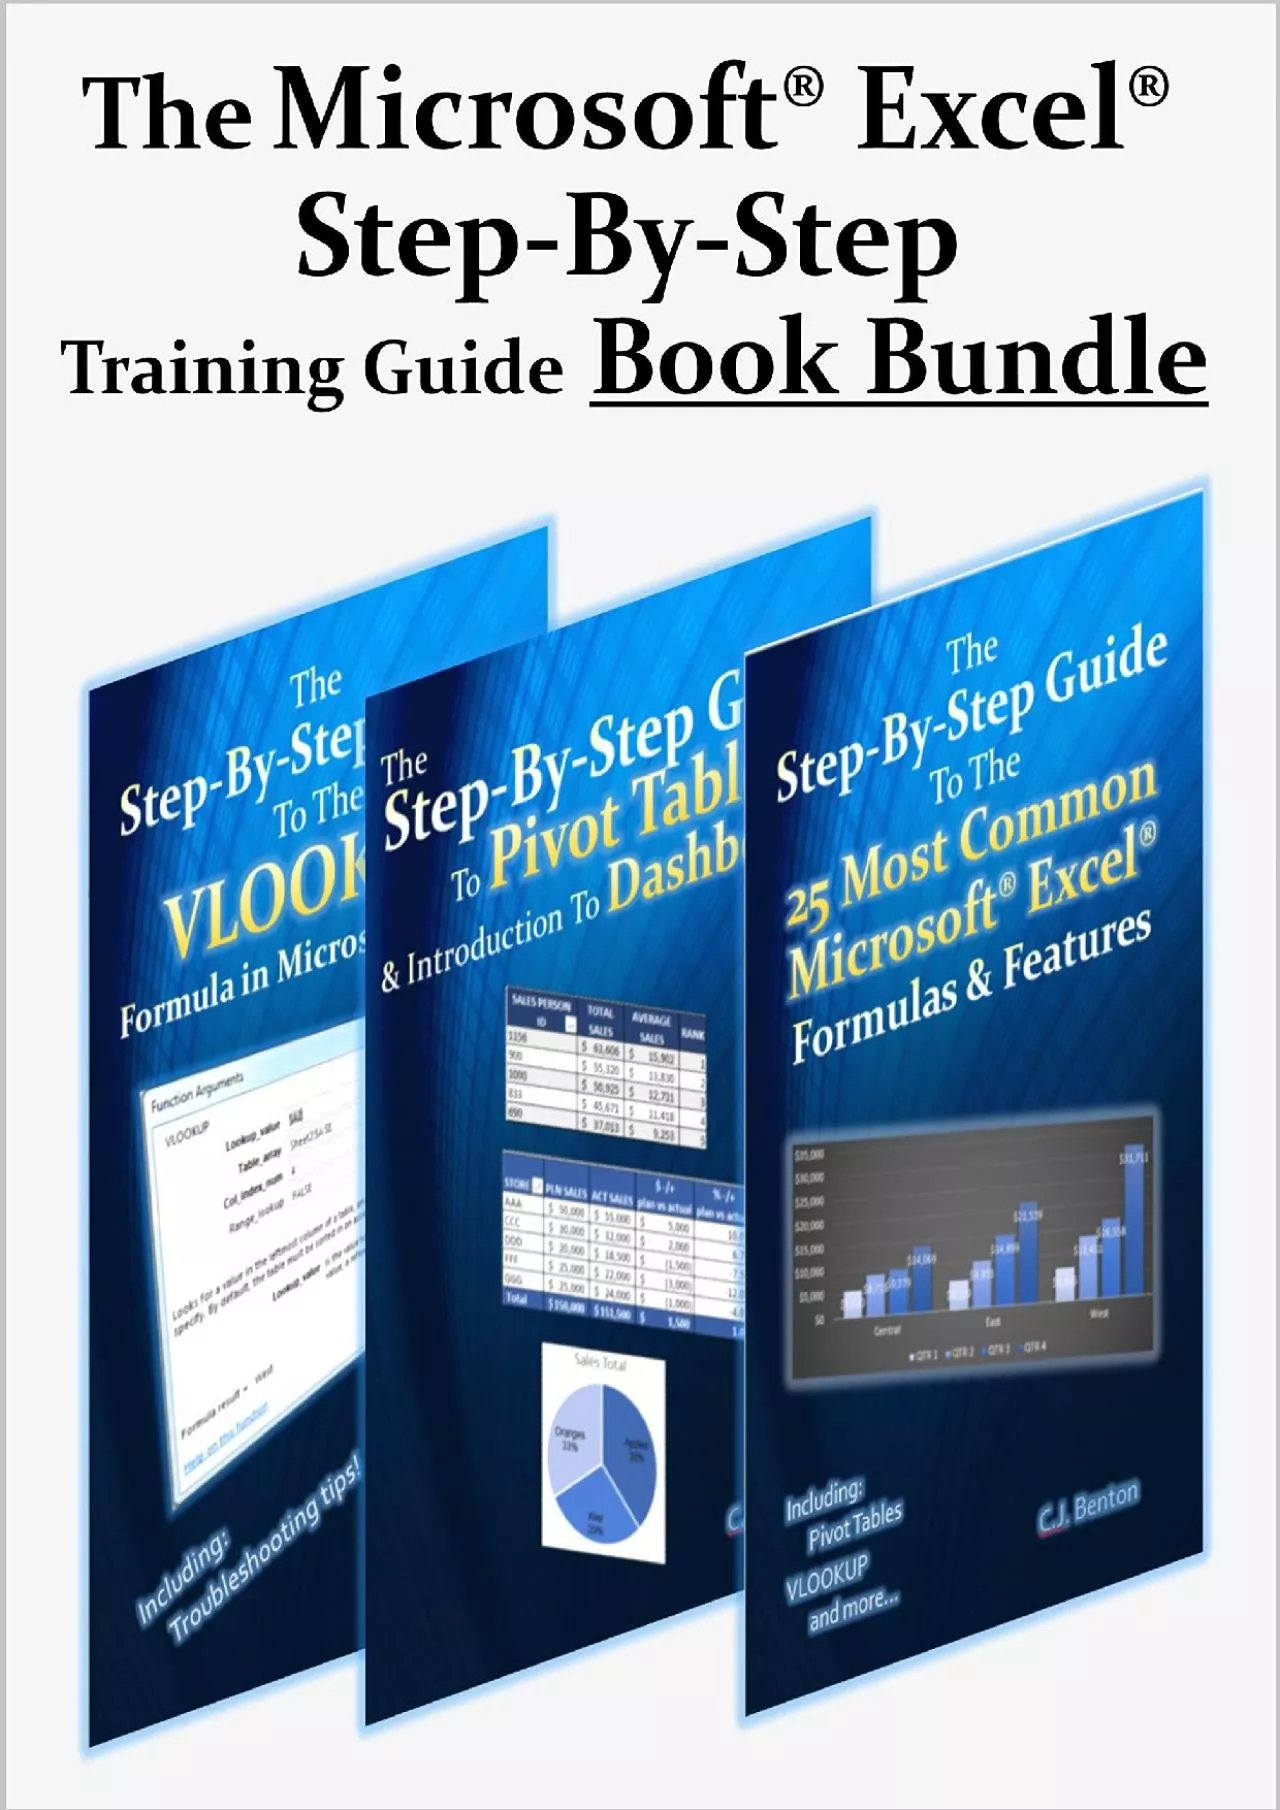 (DOWNLOAD)-The Microsoft Excel Step-By-Step Training Guide Book Bundle (The Microsoft